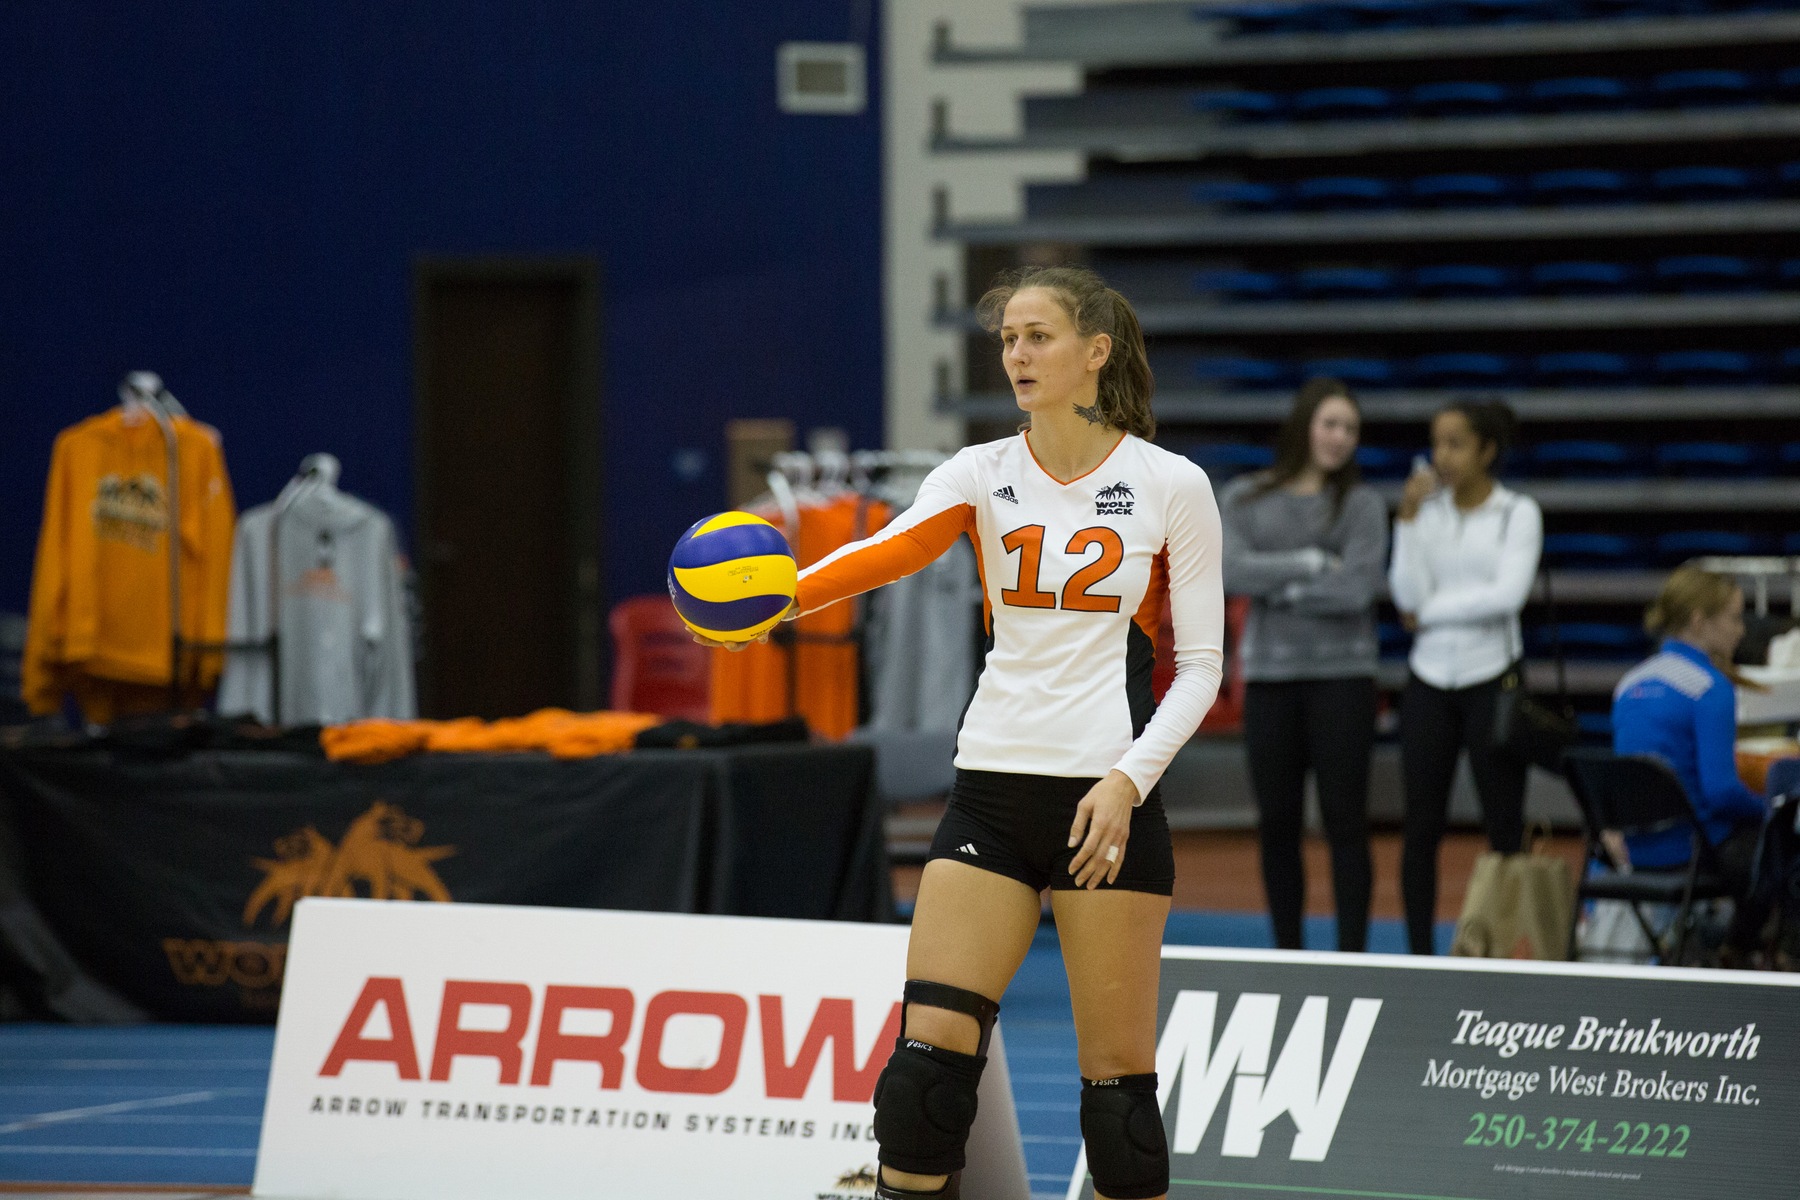 Pakhomenko has elevated the game not only for her teammates but for everyone in varsity women’s volleyball.